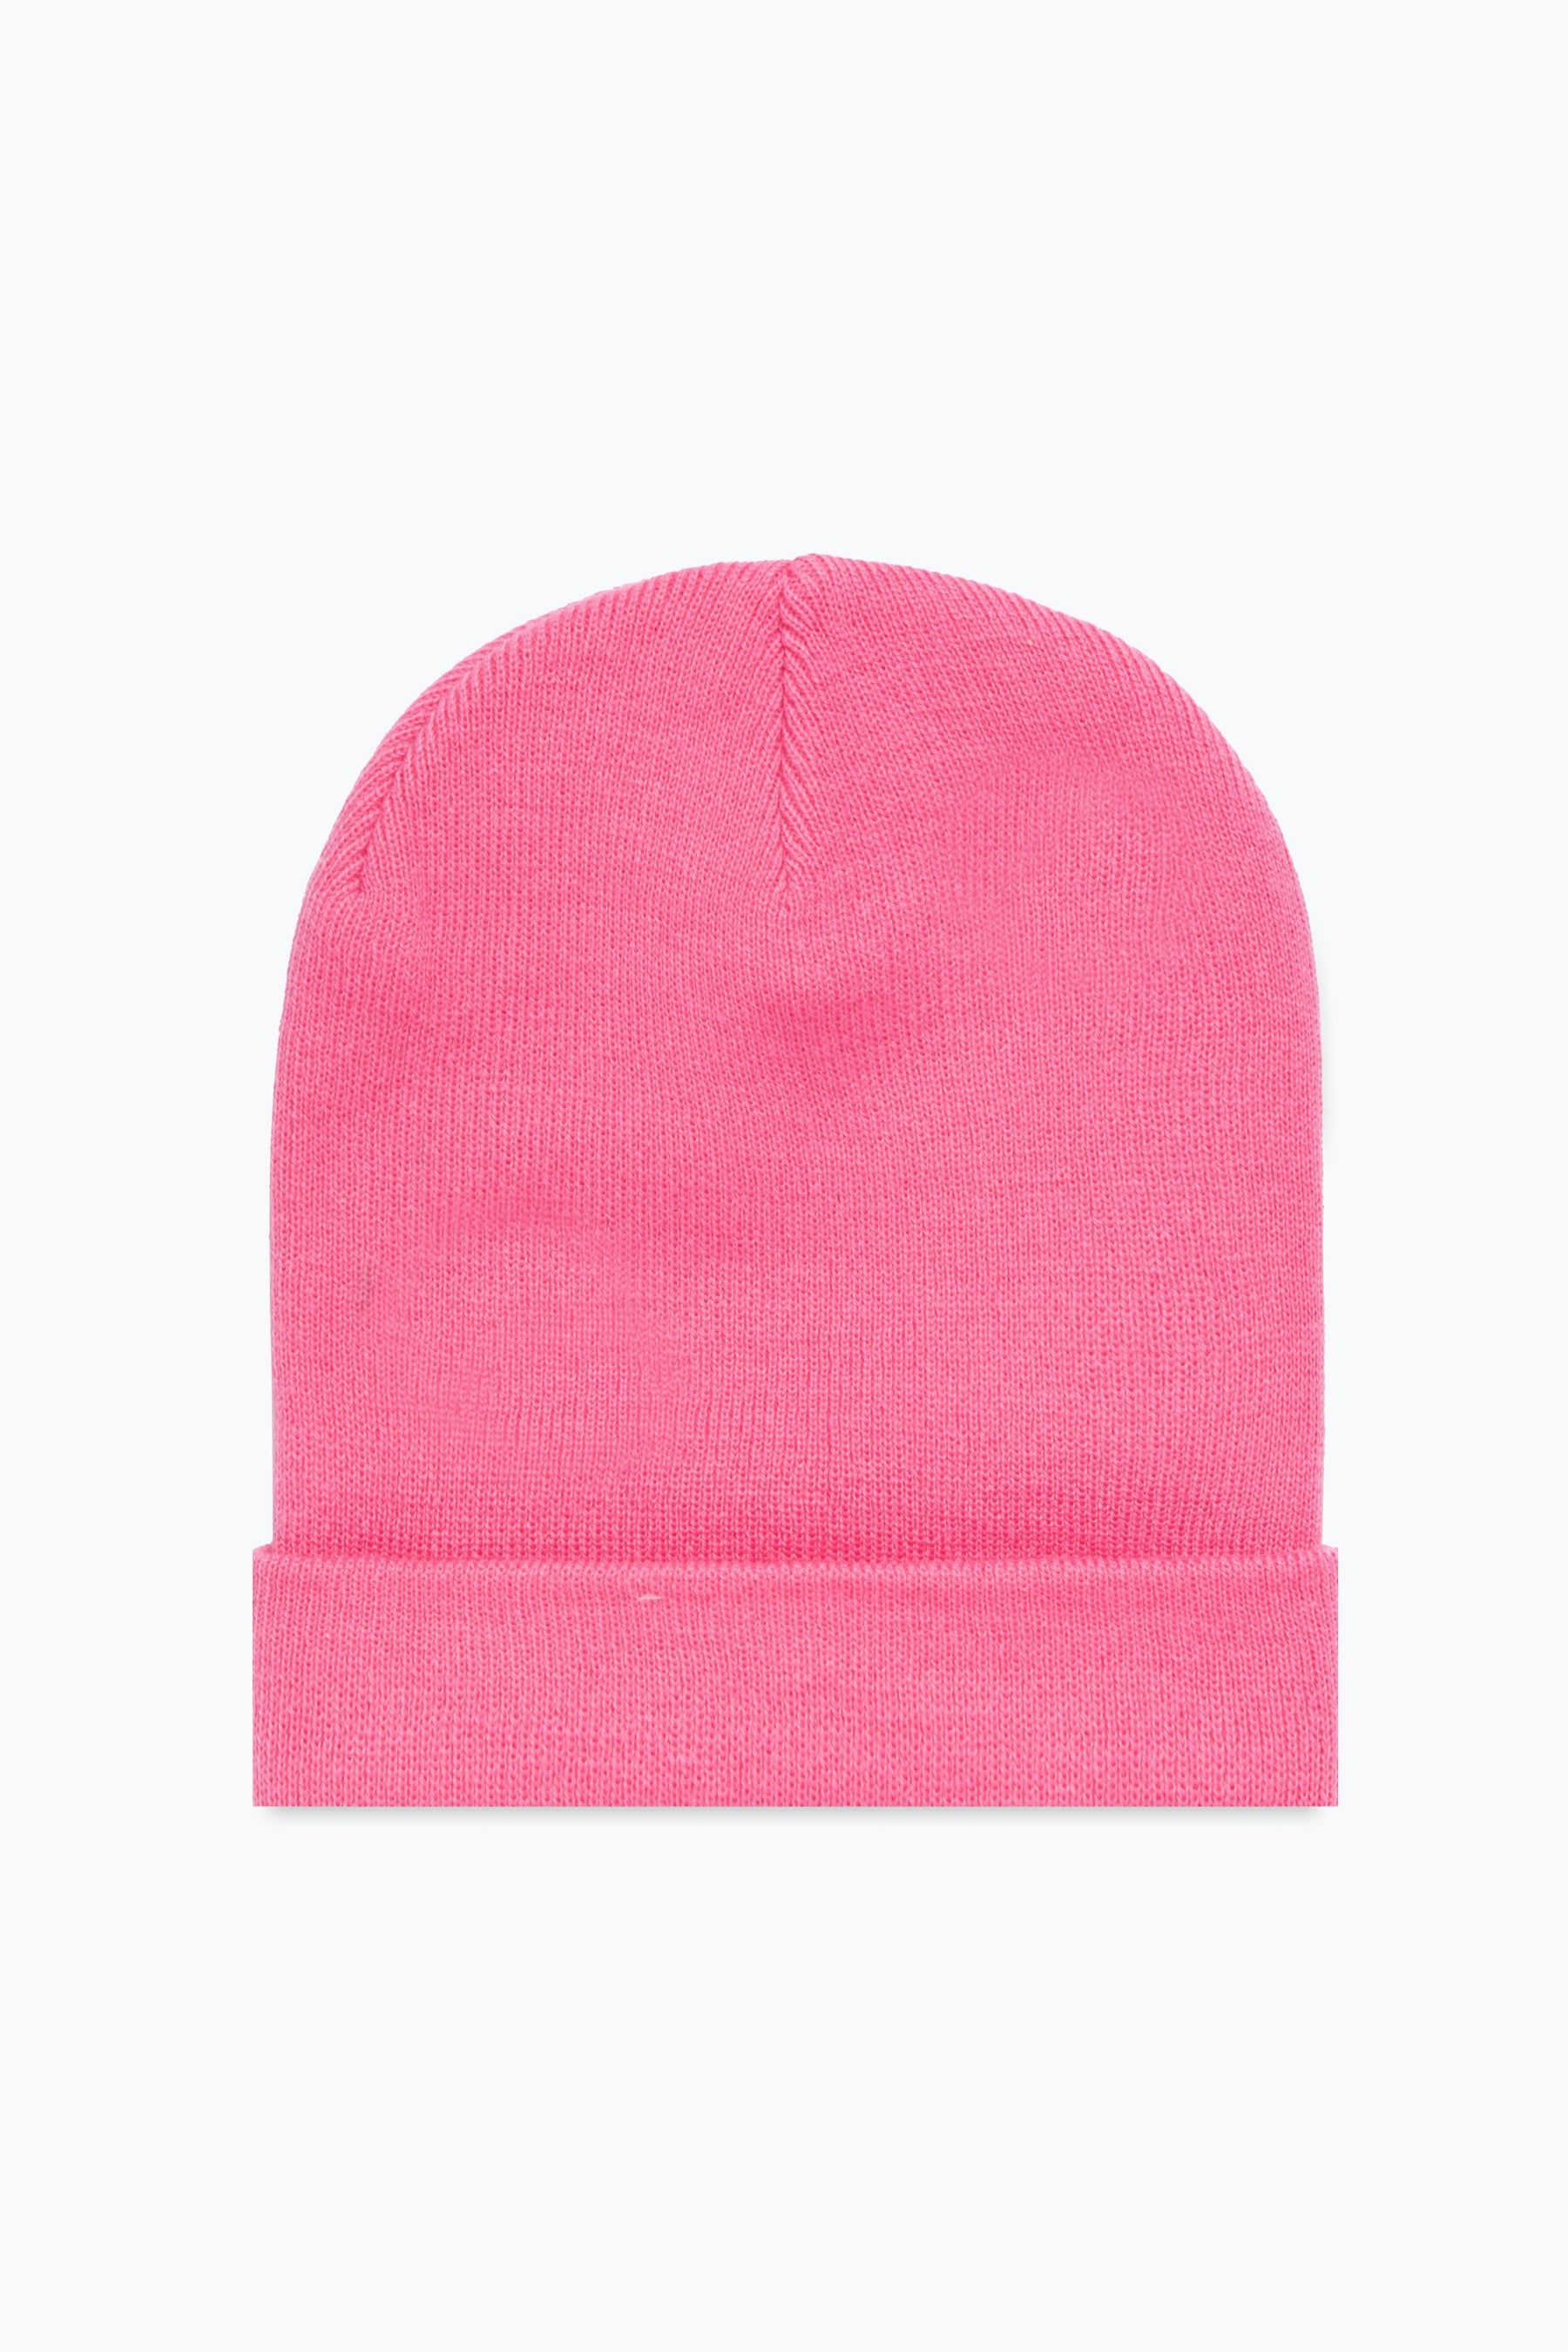 Keep your head warm with the HYPE. pink scribble beanie. In a one-size fit, this is perfect for adults. In a pink all over soft-touch fabric in double knit for the ultimate comfort. Finished with a cuff design and the new HYPE. signature logo in a contrasting white woven on the front. Machine wash inside out at 30 degrees.